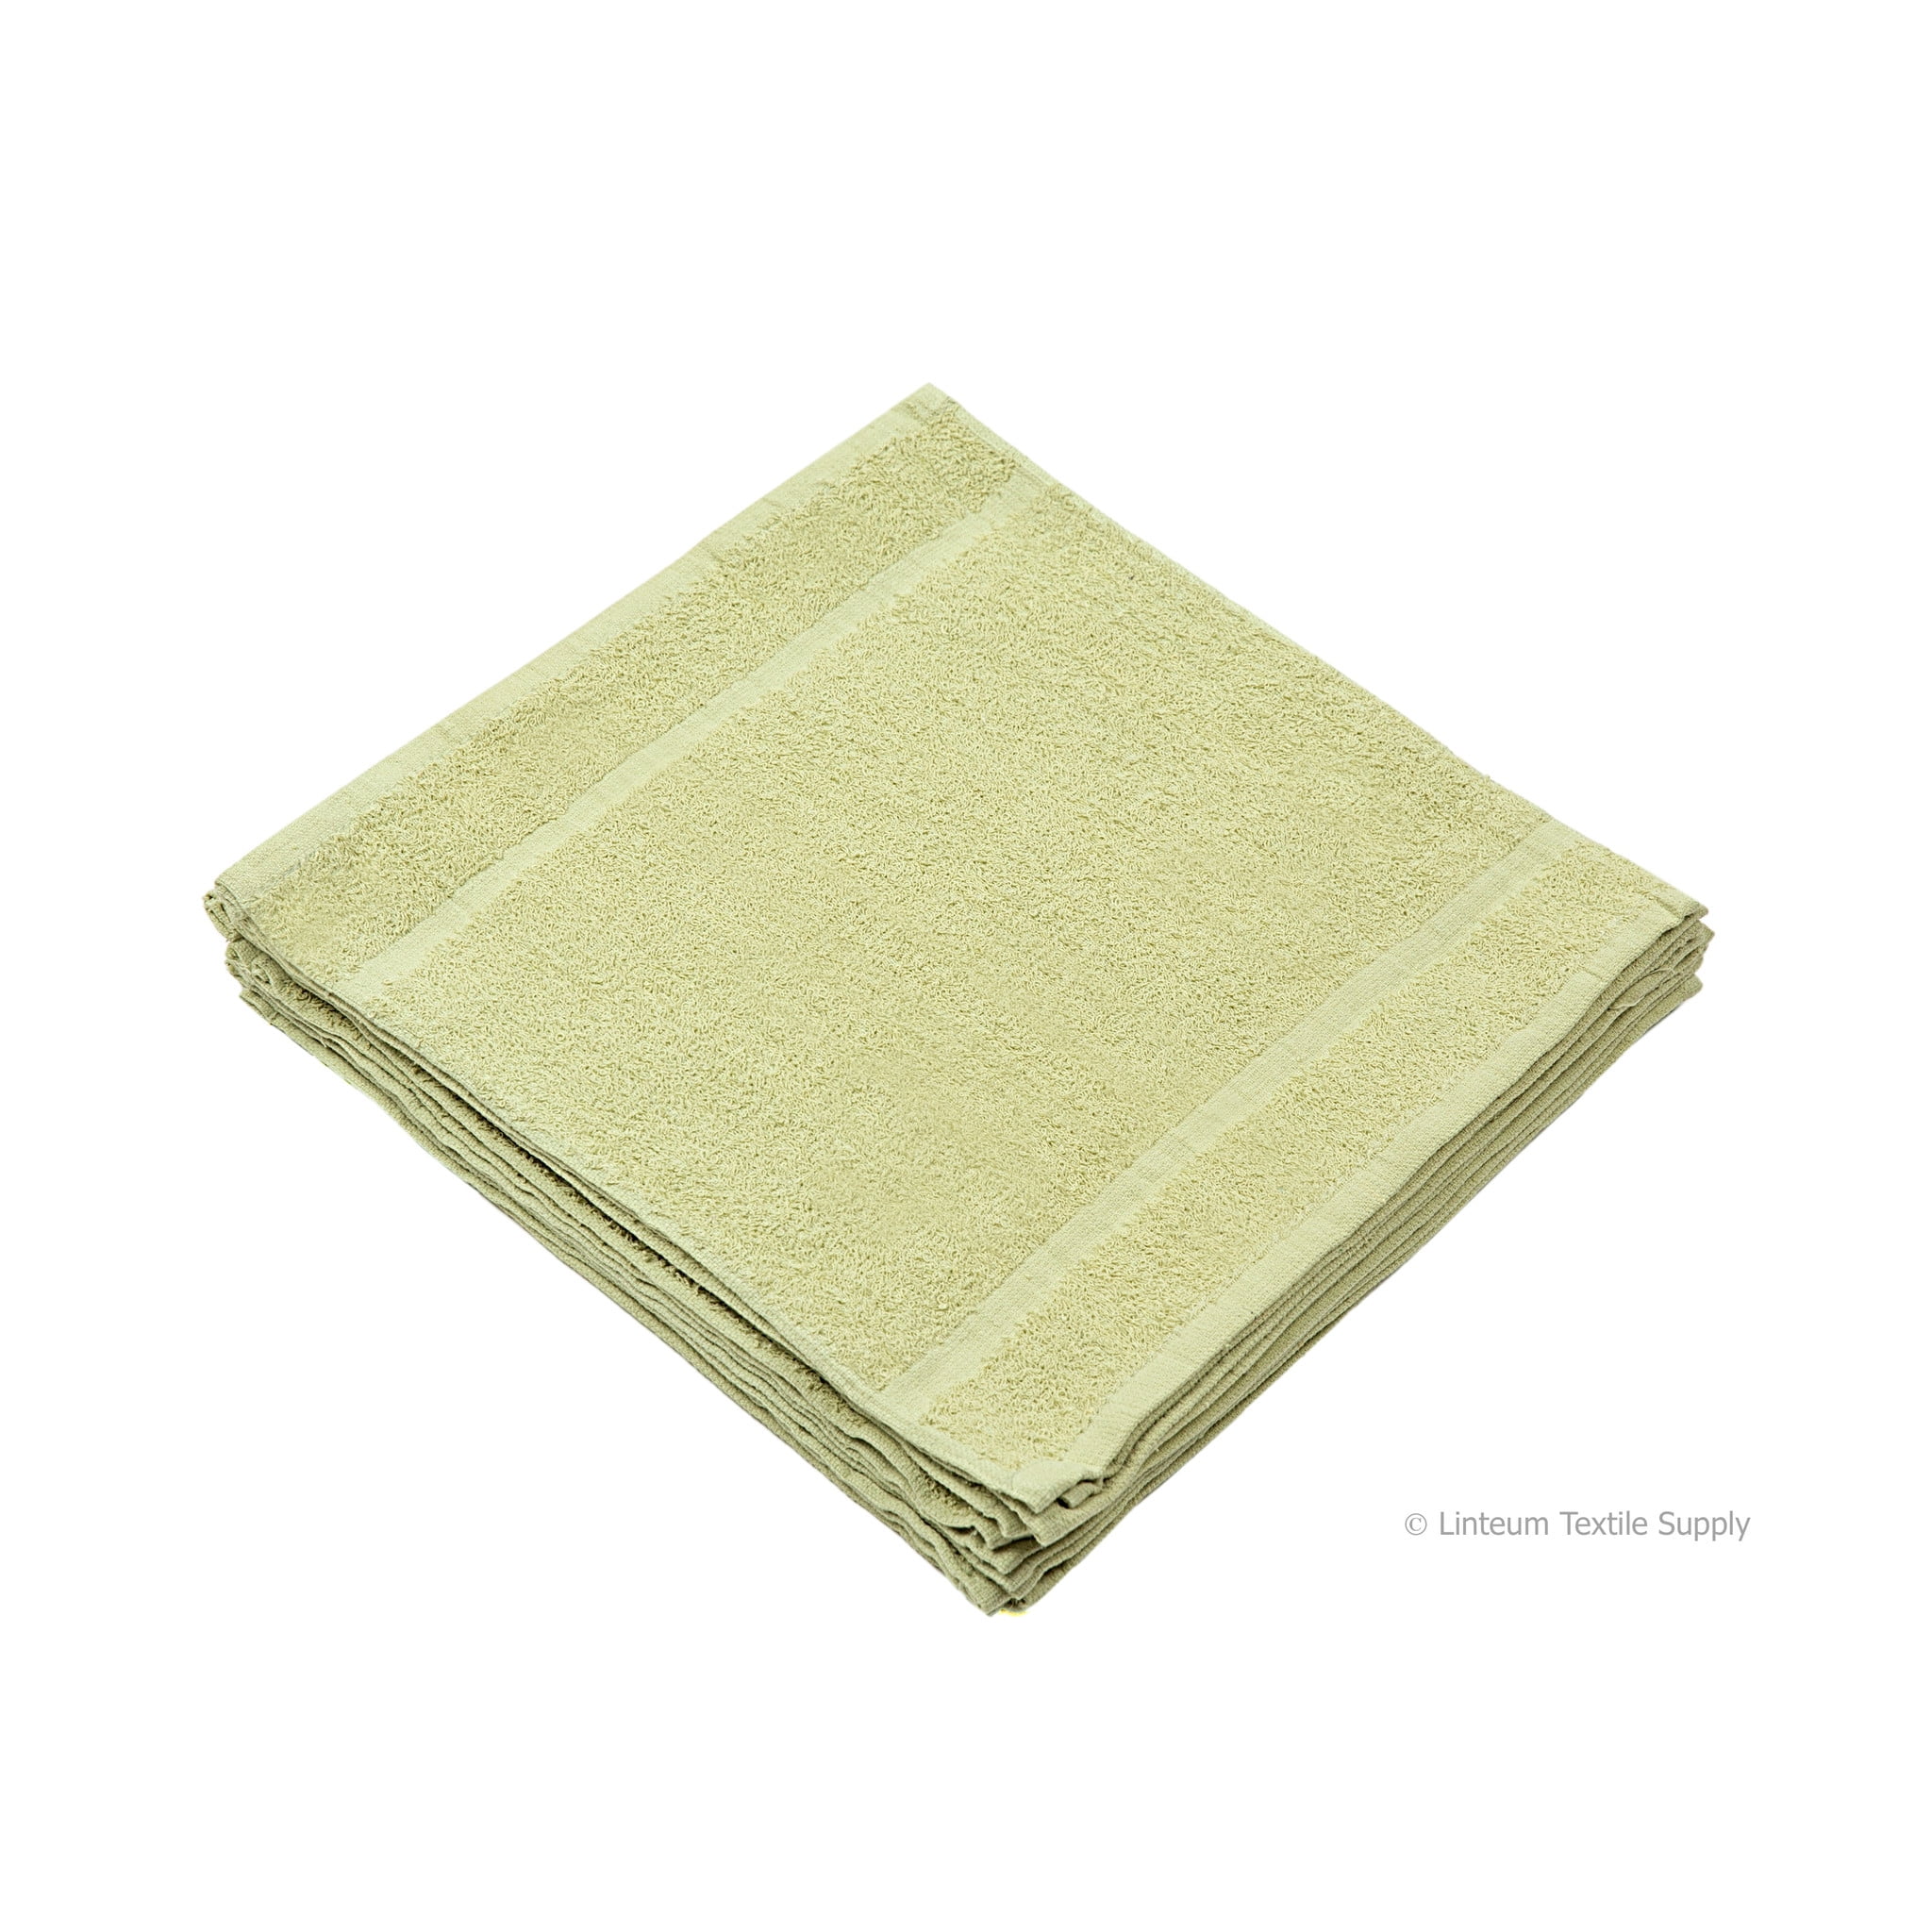 Linteum Textile (12-Pack, 12x12 in, Sage Green) WASHCLOTHS Face Towels ...